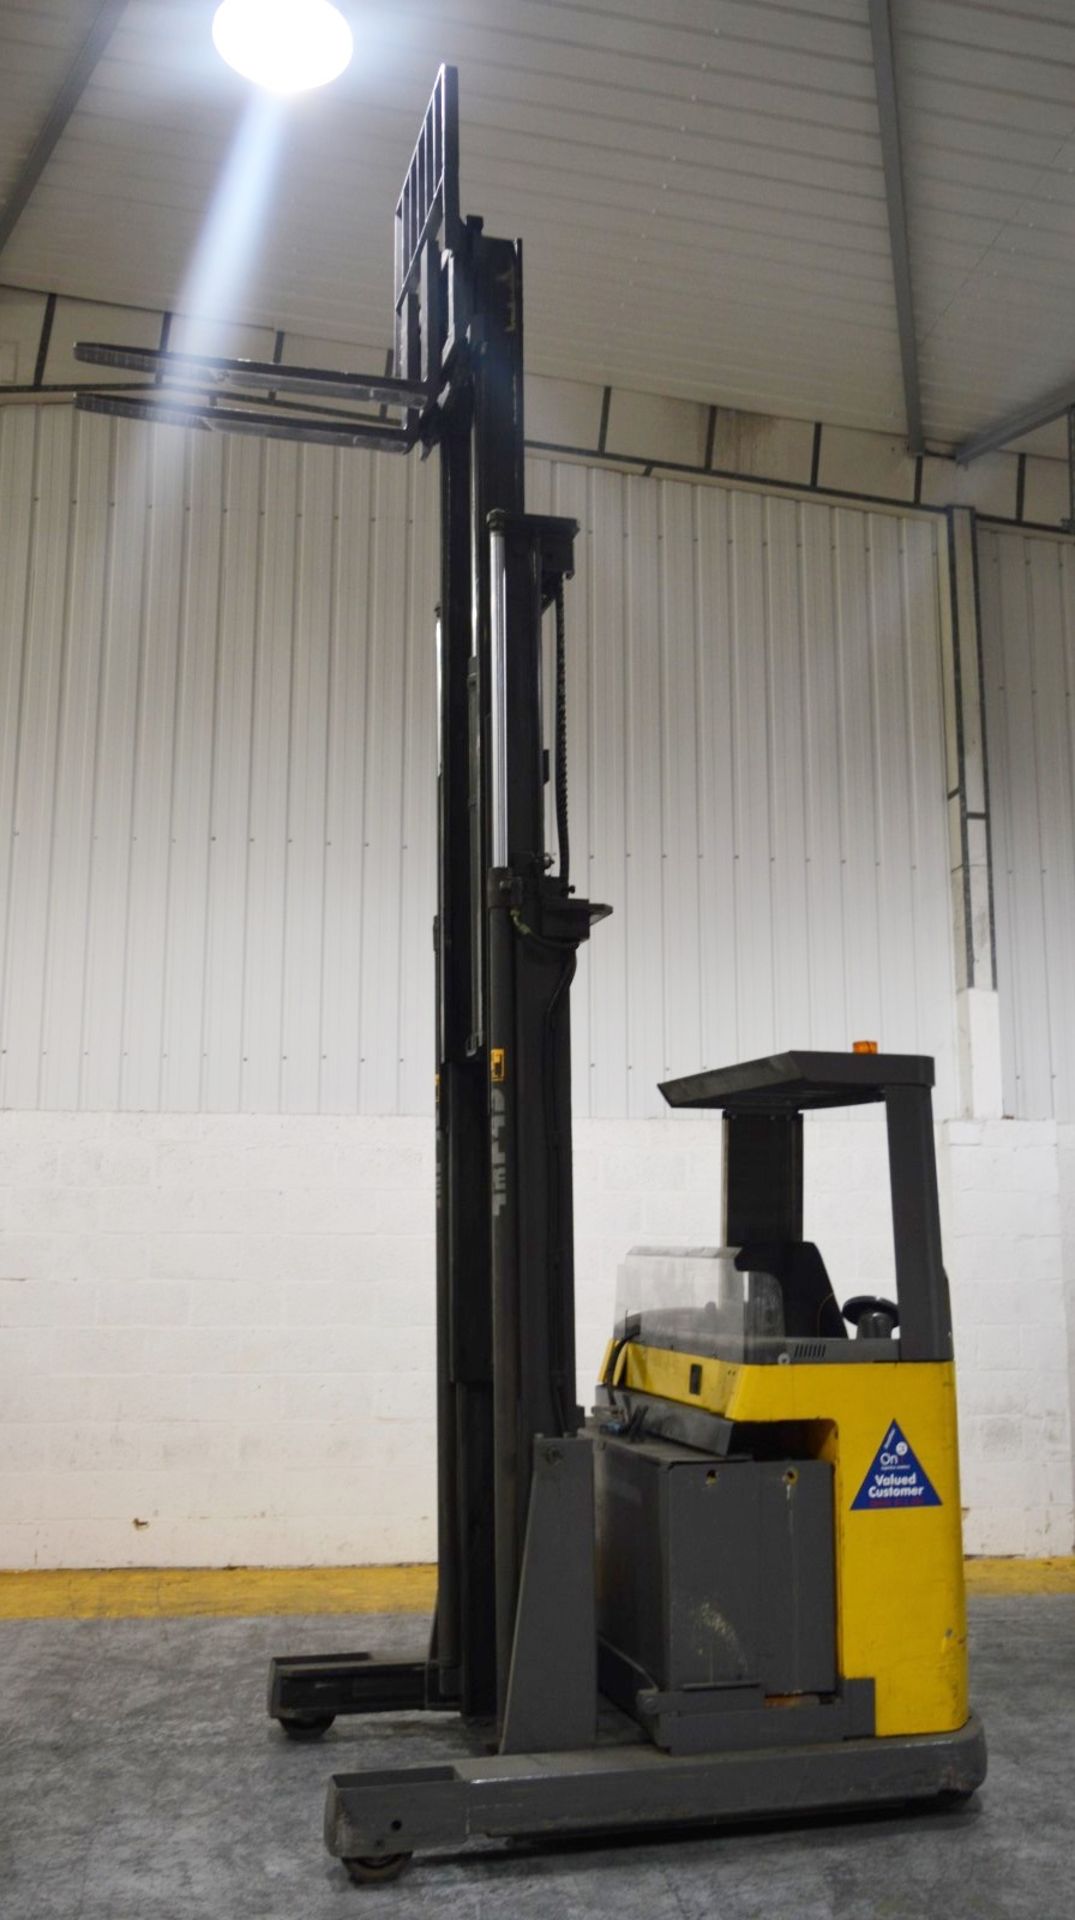 1 x Atlet Electric Forklift Reach Truck - 1997 - Model 200DTFVXM 660 UHS - Includes Operation Code - Image 2 of 5